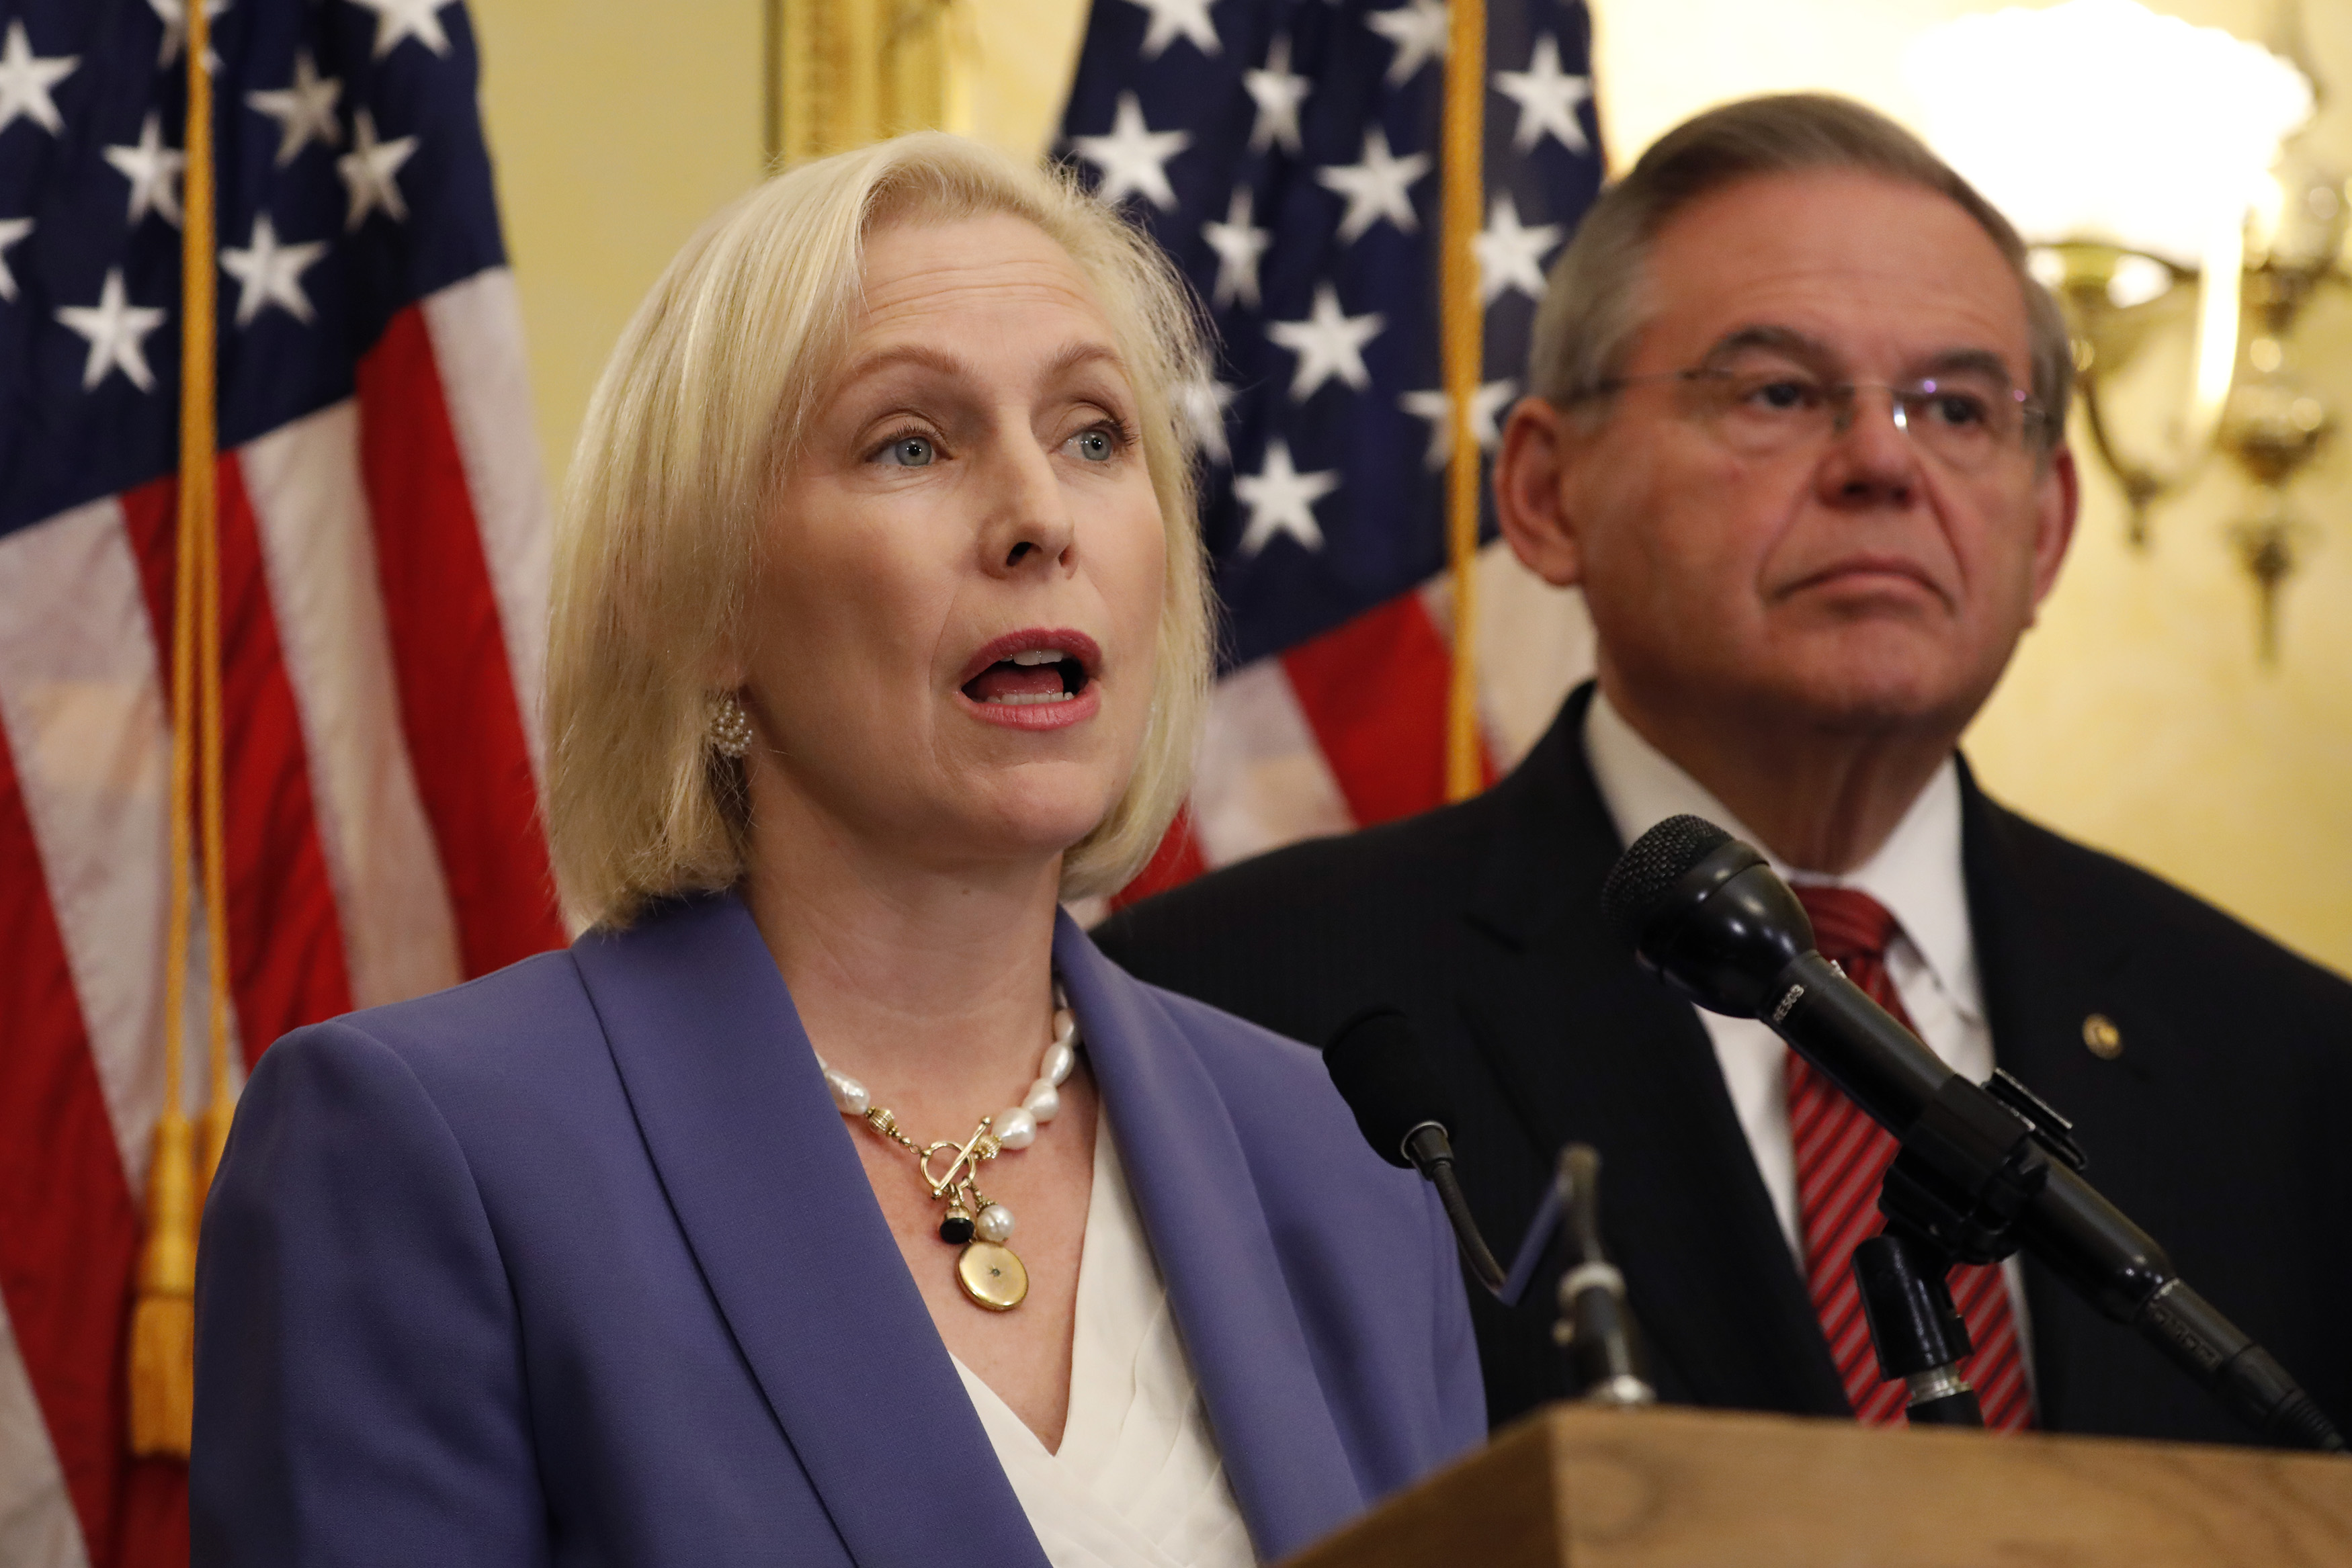 Kirsten Gillibrand 5 Fast Facts You Need To Know 4624